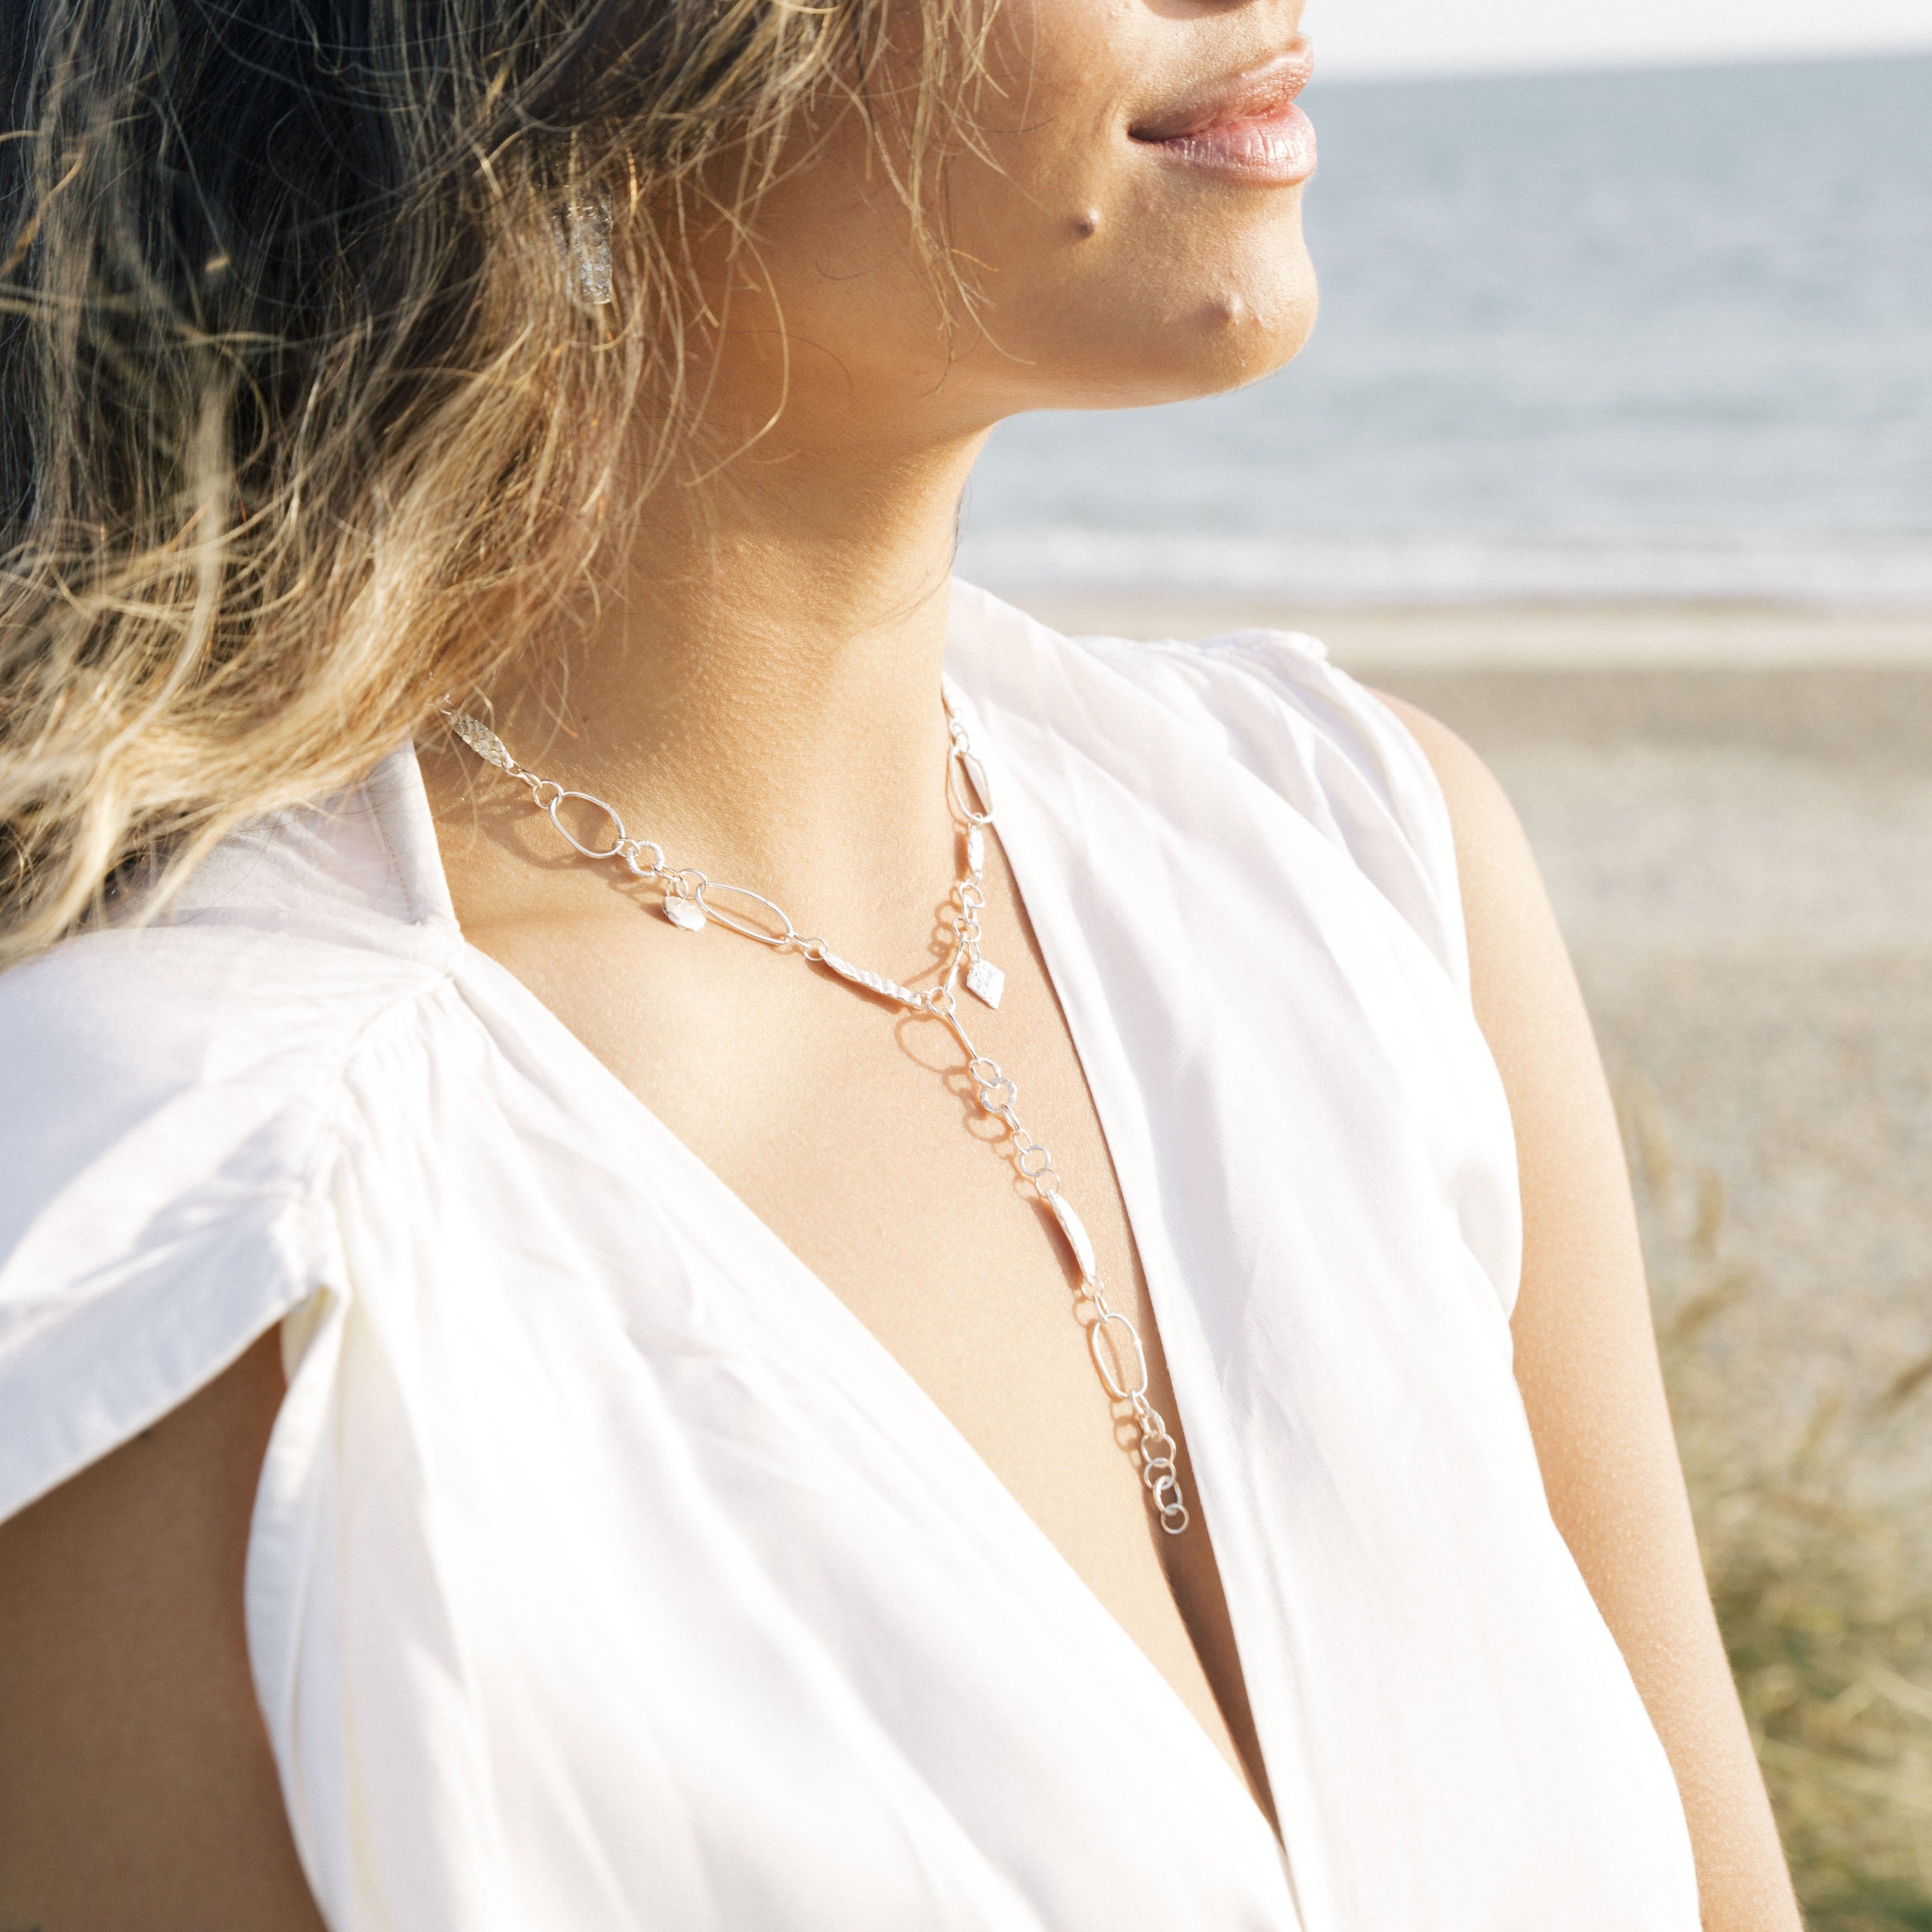 Versatile and stunning, the Wild Thing two-in-one piece was designed to be worn for any occasion, and full of tactile, timeless treasures, unique and different in each piece. Explore the intricate and unique details of this piece with every handcrafted link, Siren charm, and shell imprint. Wear this piece as a necklace, or wrapped around your wrist or ankle. Enjoy the versatility and endless possibilities this treasure brings.